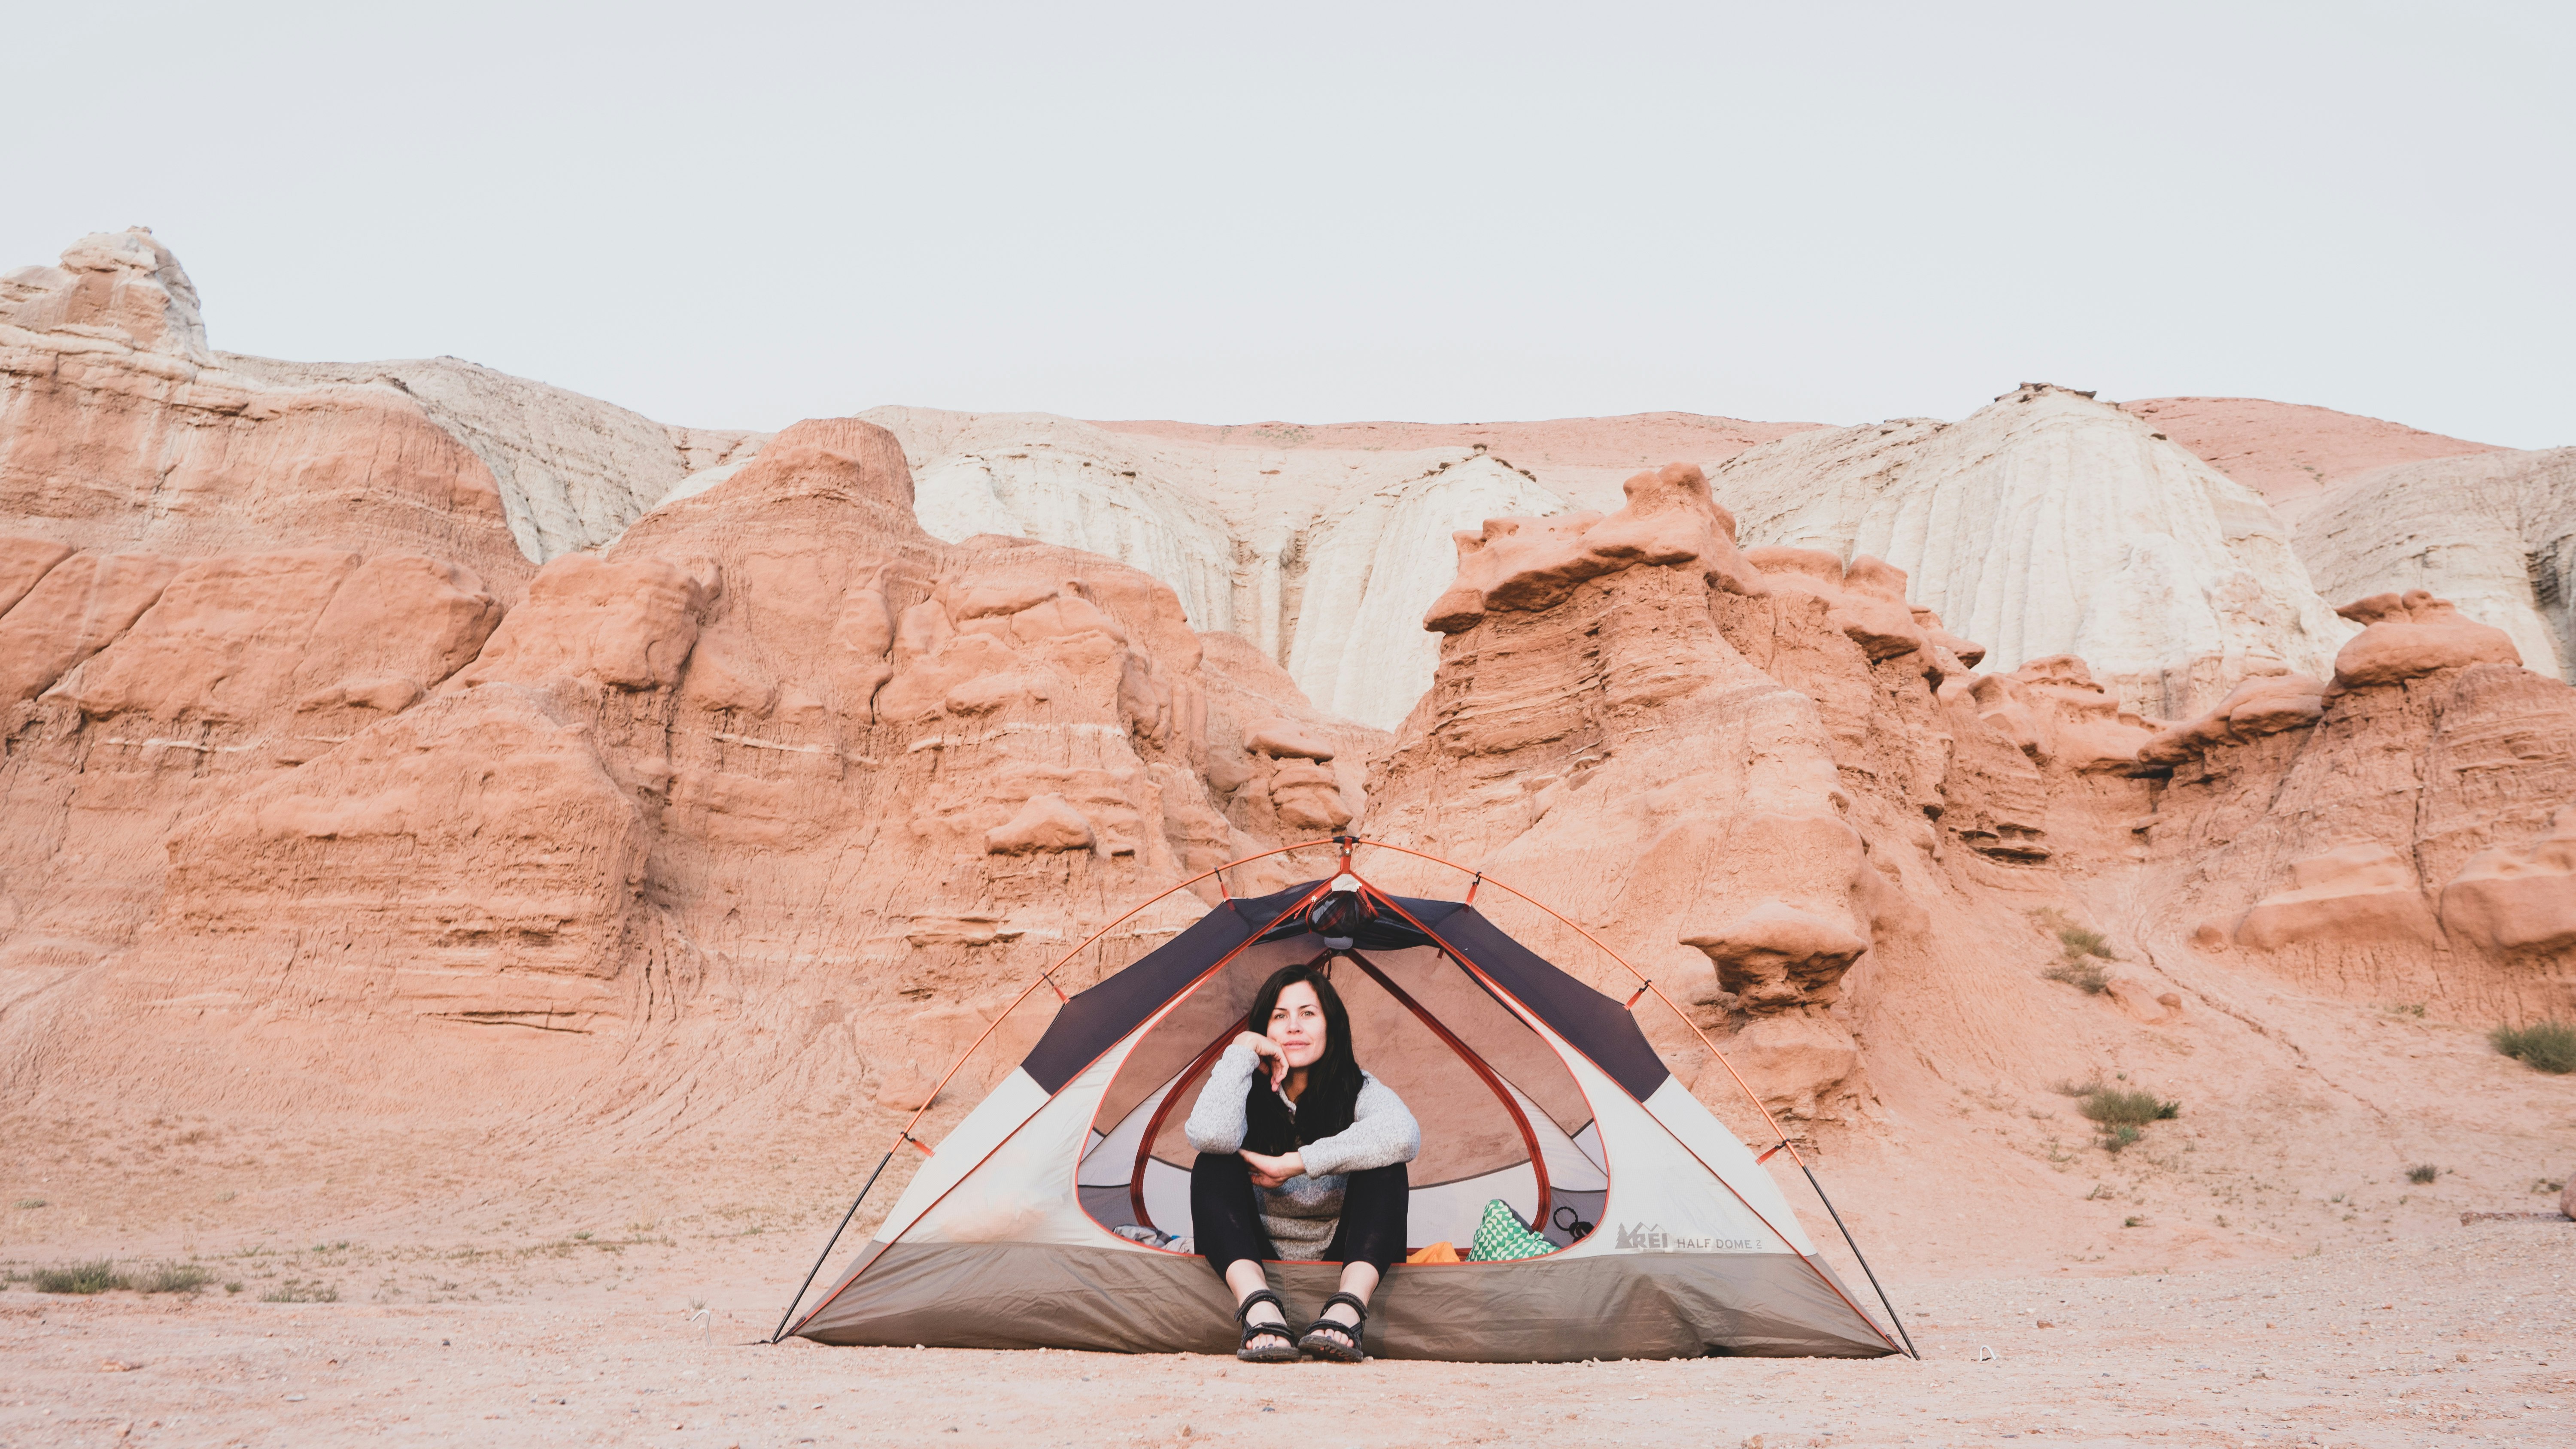 man in black jacket and gray pants sitting on gray dome tent on brown rock formation